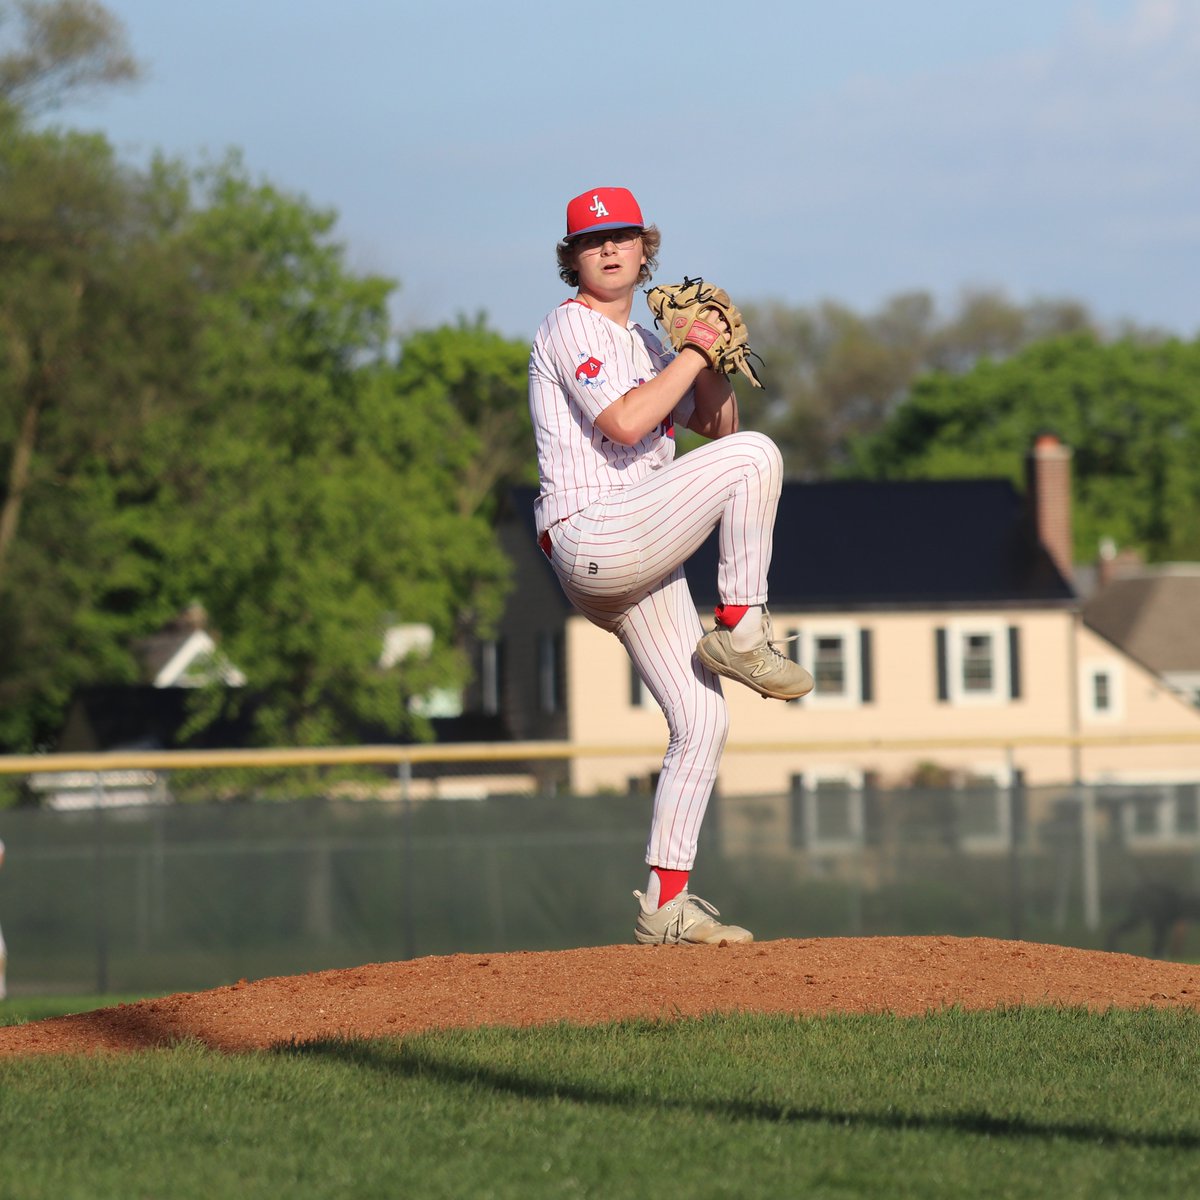 Check out some of the pictures from the Baseball team against Mishawaka Marian. All of the pictures can be seen at johnadamsathletics.com/photos
⚾️🦅🔴⚪️🔵📸⚾️